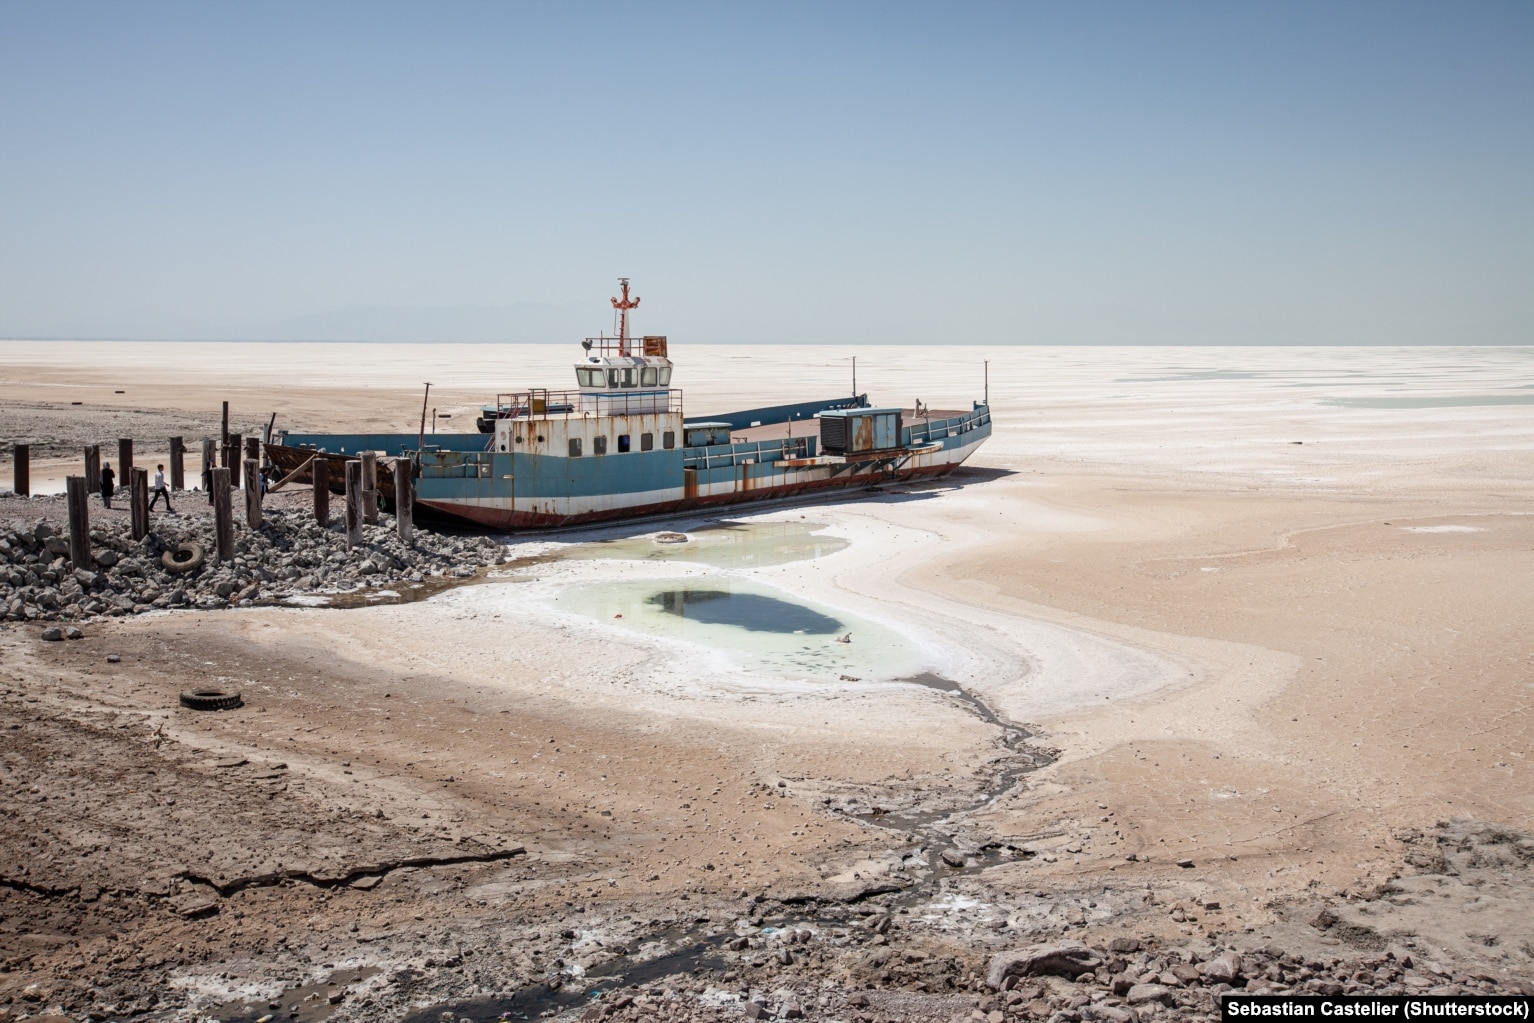 Lake Urmia, one of the world's largest salt lakes, has shrunk in recent decades due to prolonged droughts and the extraction of water for farming and dams. (file photo)